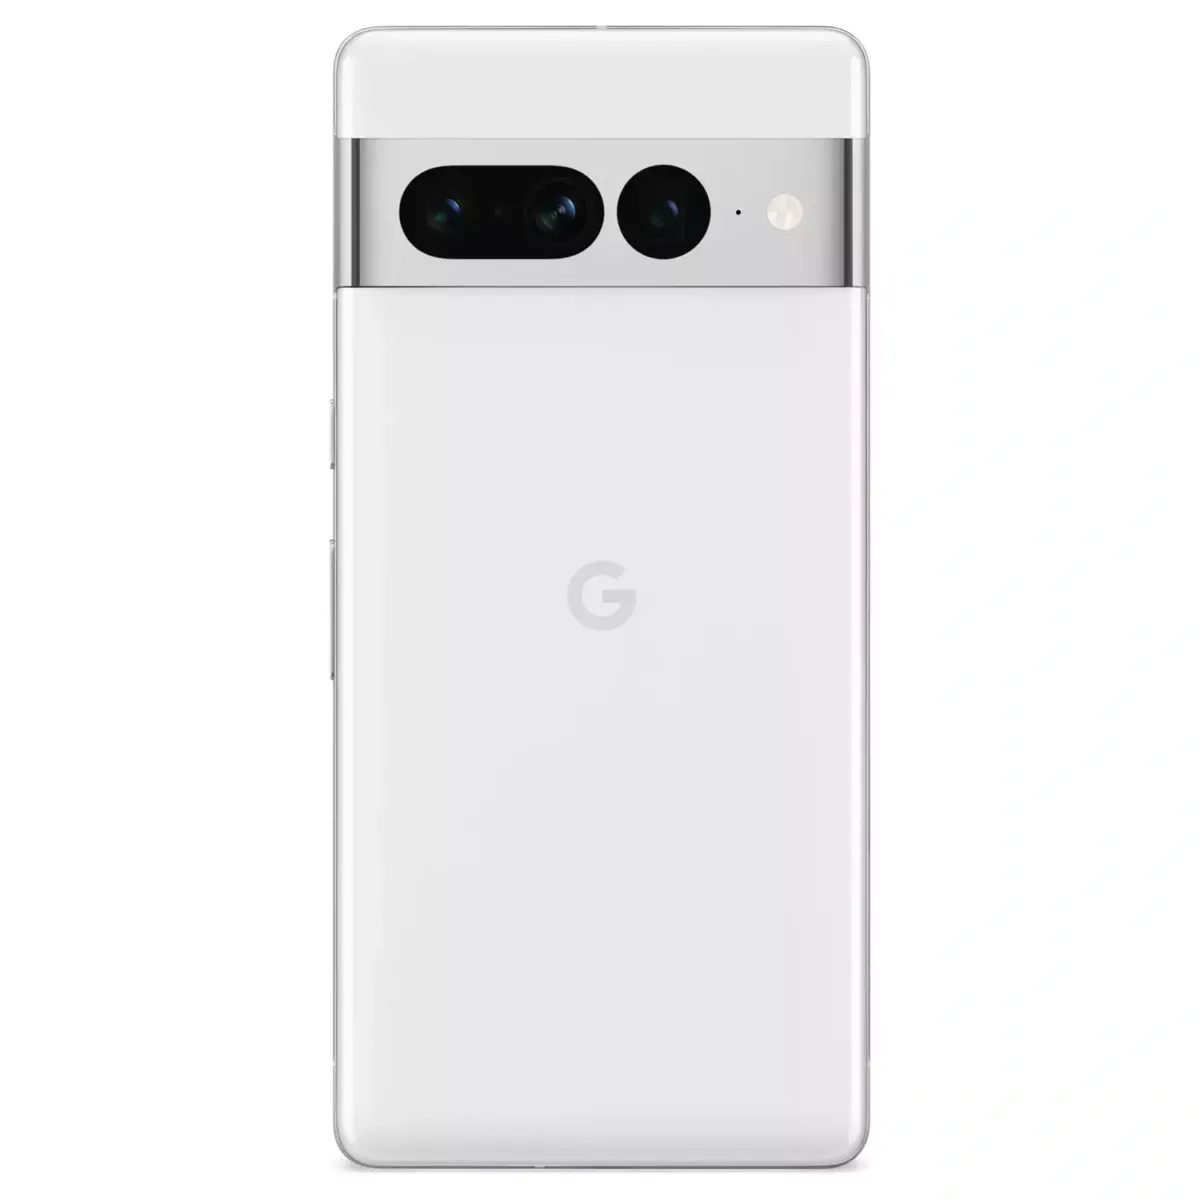 All three color variants of the Pixel 7 Pro appear to be stock at T-Mobile at the time of writing this post.